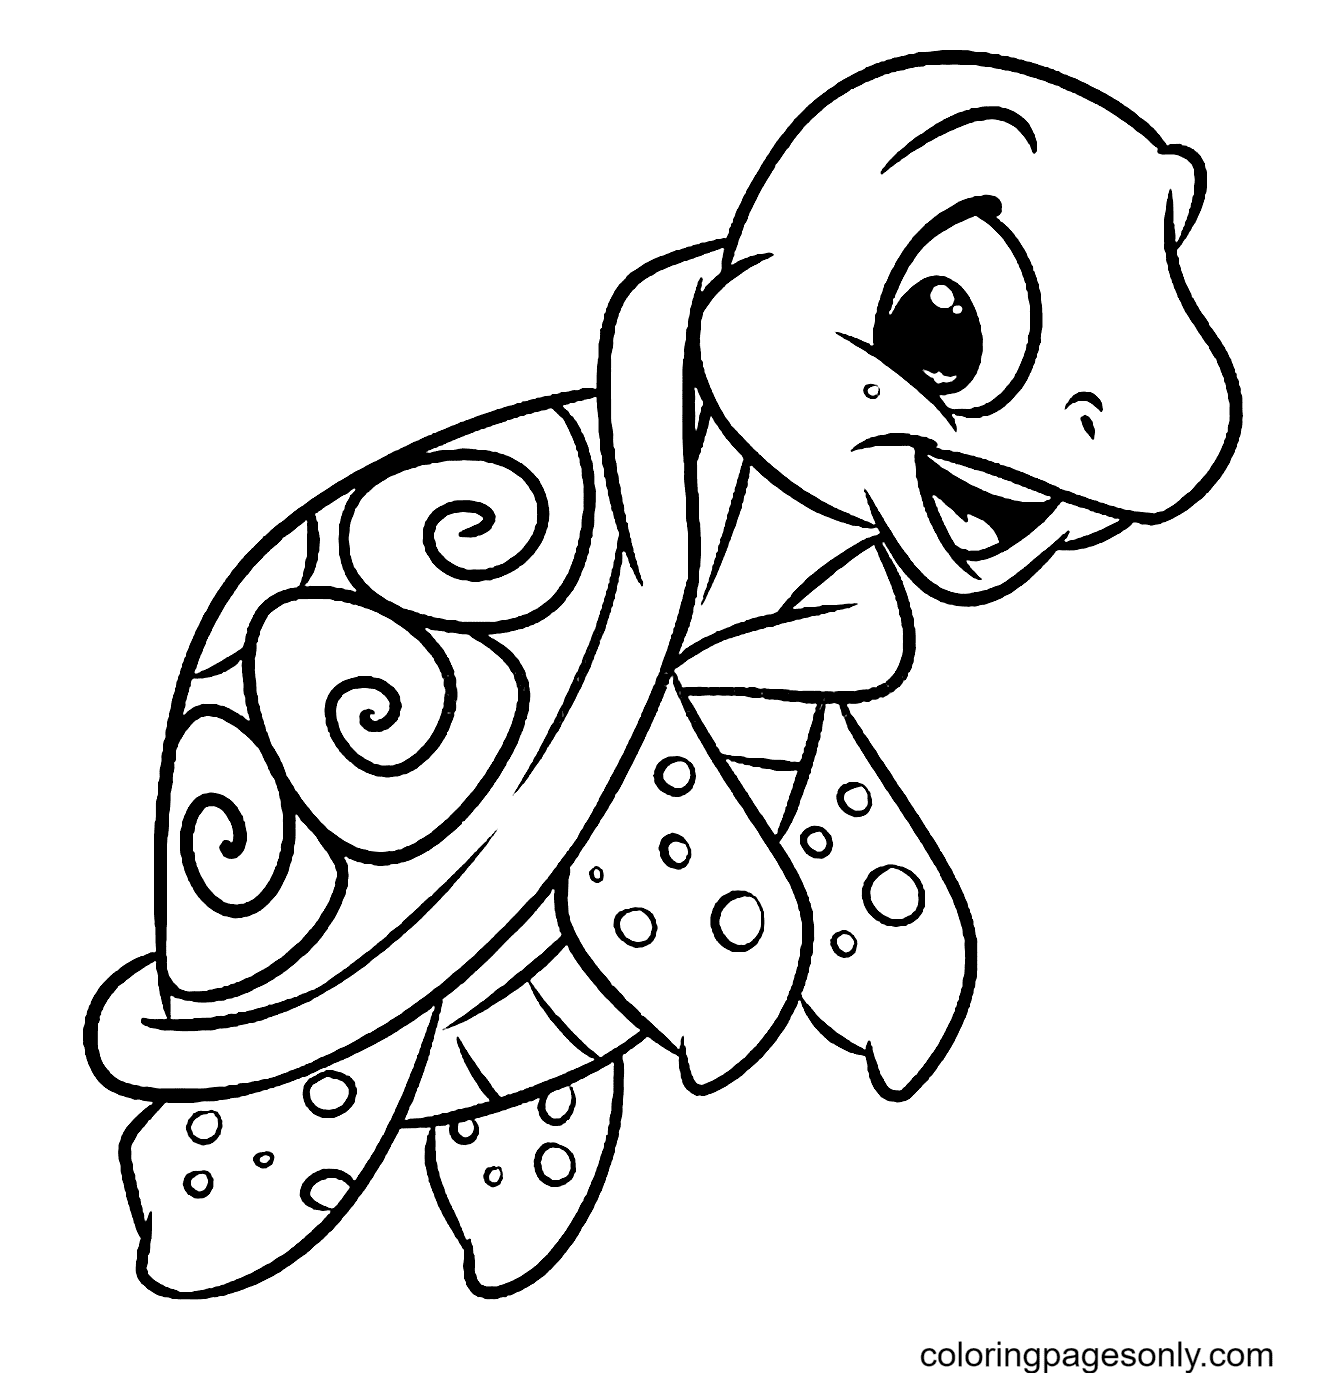 Cute Turtle Free Coloring Pages   Turtle Coloring Pages   Coloring ...